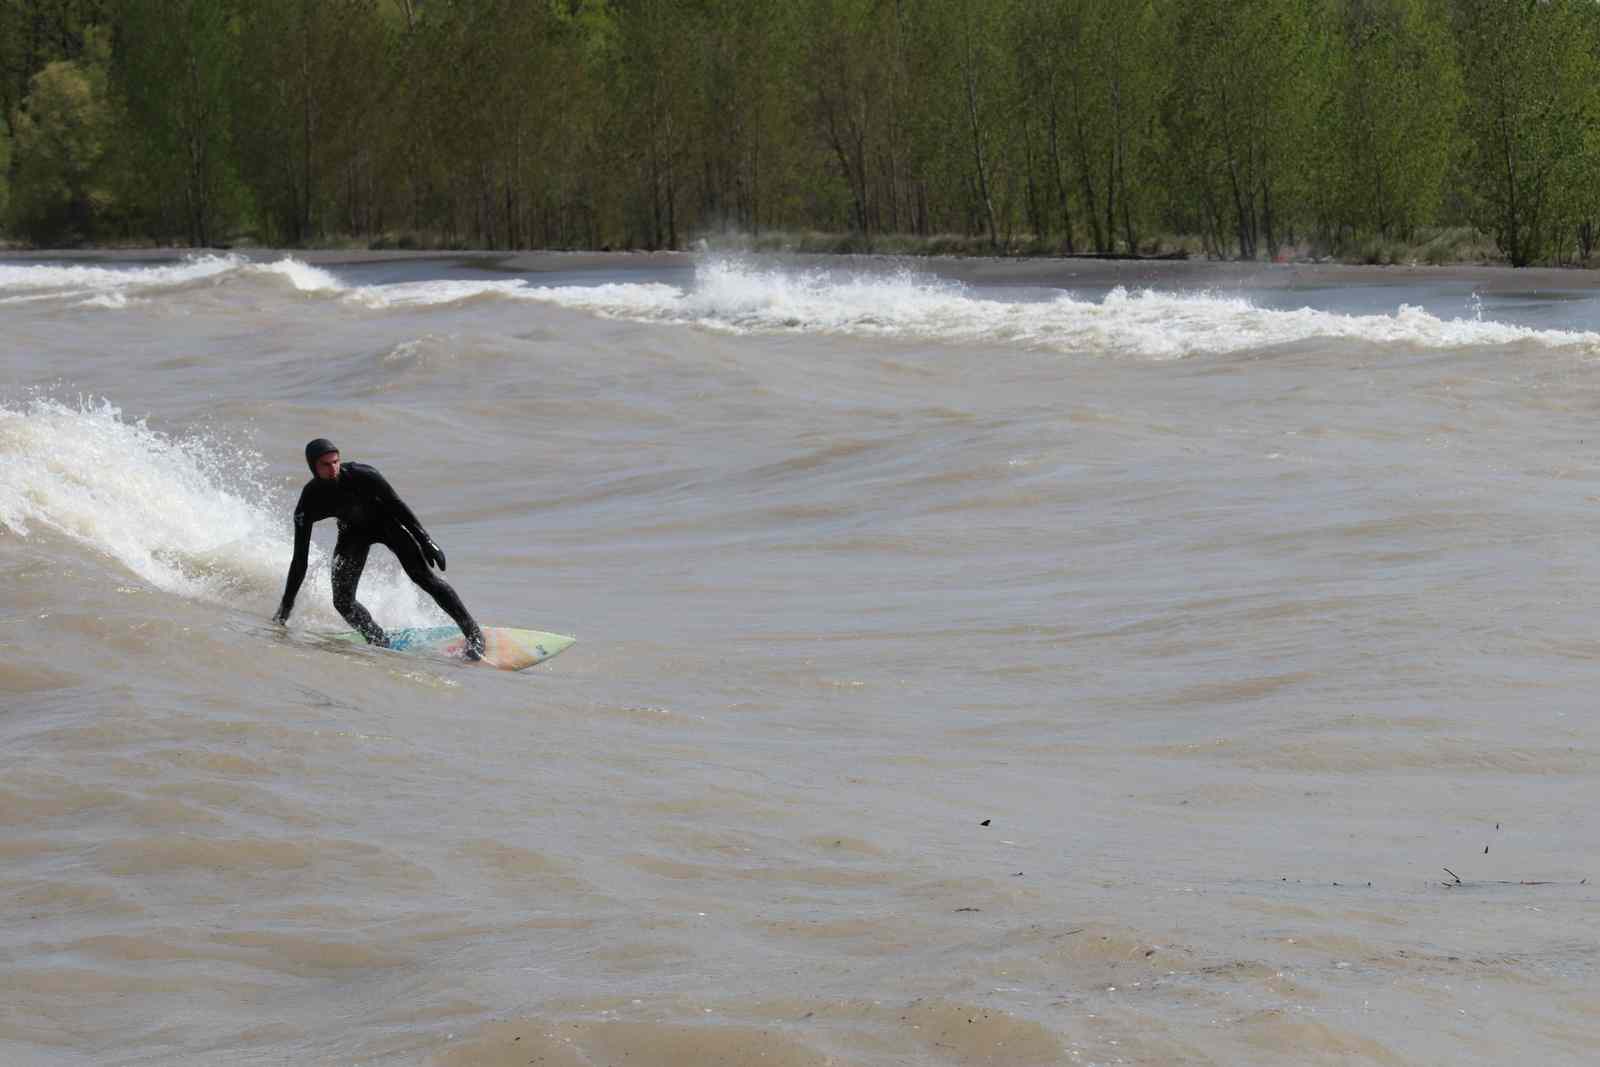 A man drags his hand in the water while surfing away from a forested shore.